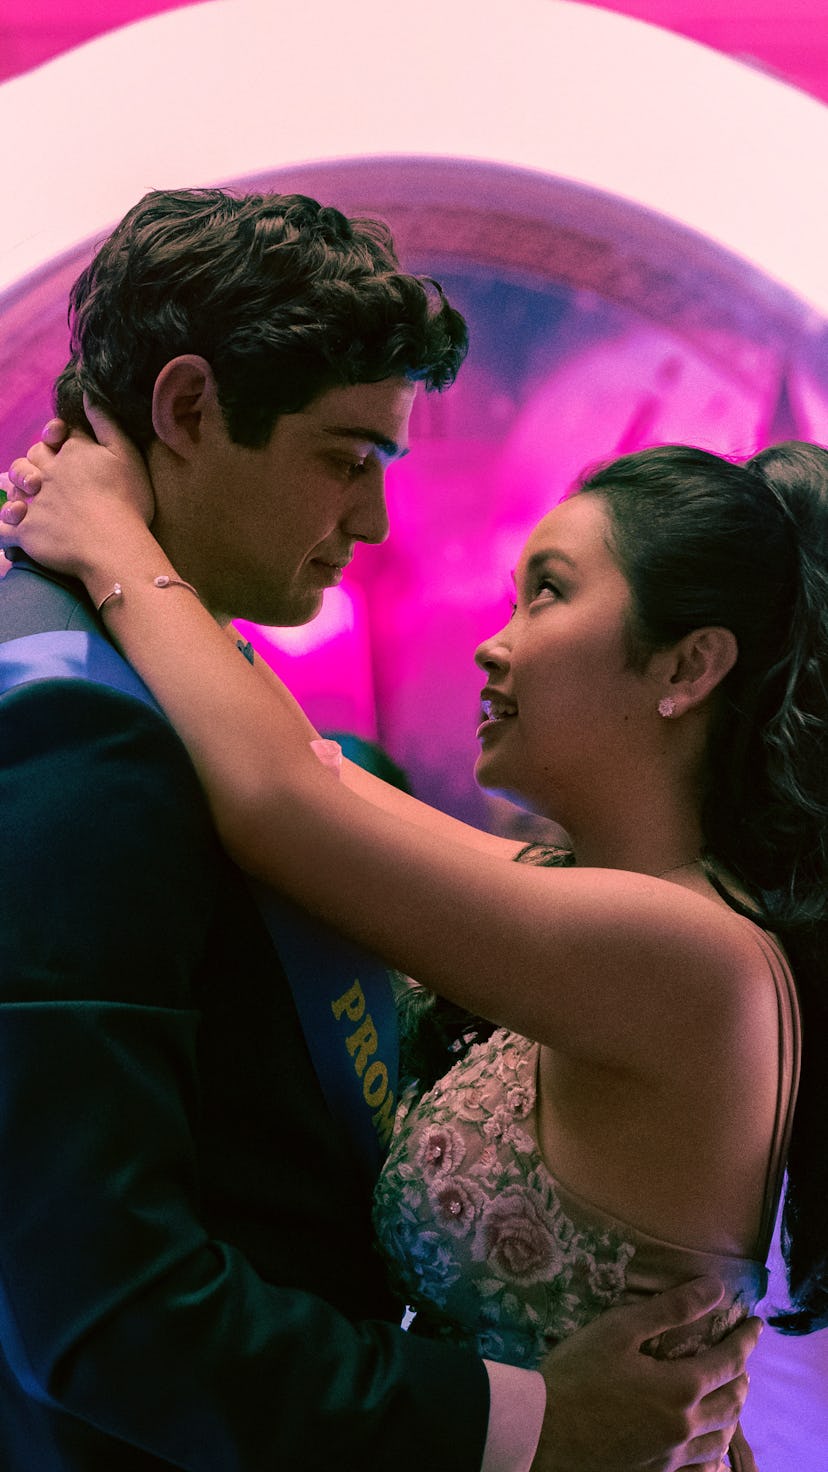 Lana Condor and Noah Centineo in 'To All the Boys: Always and Forever,' via the Netflix press site.